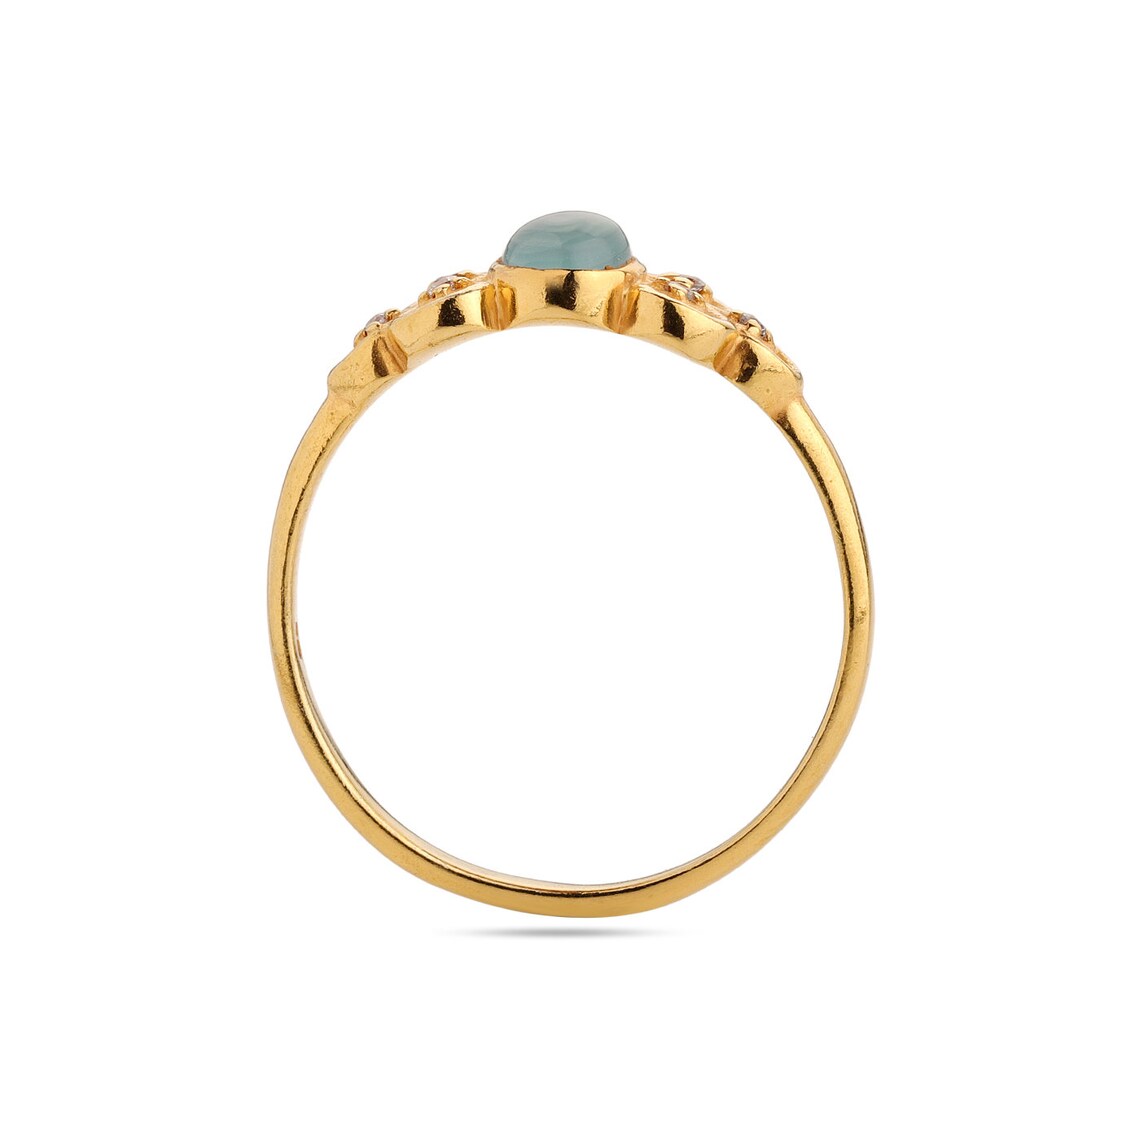 Aqua Chalcedony Ring, Stacking Sterling Silver Ring, Gold Plated, Everyday, Butterfly, Thin Stack, CZ band, Dainty Ring